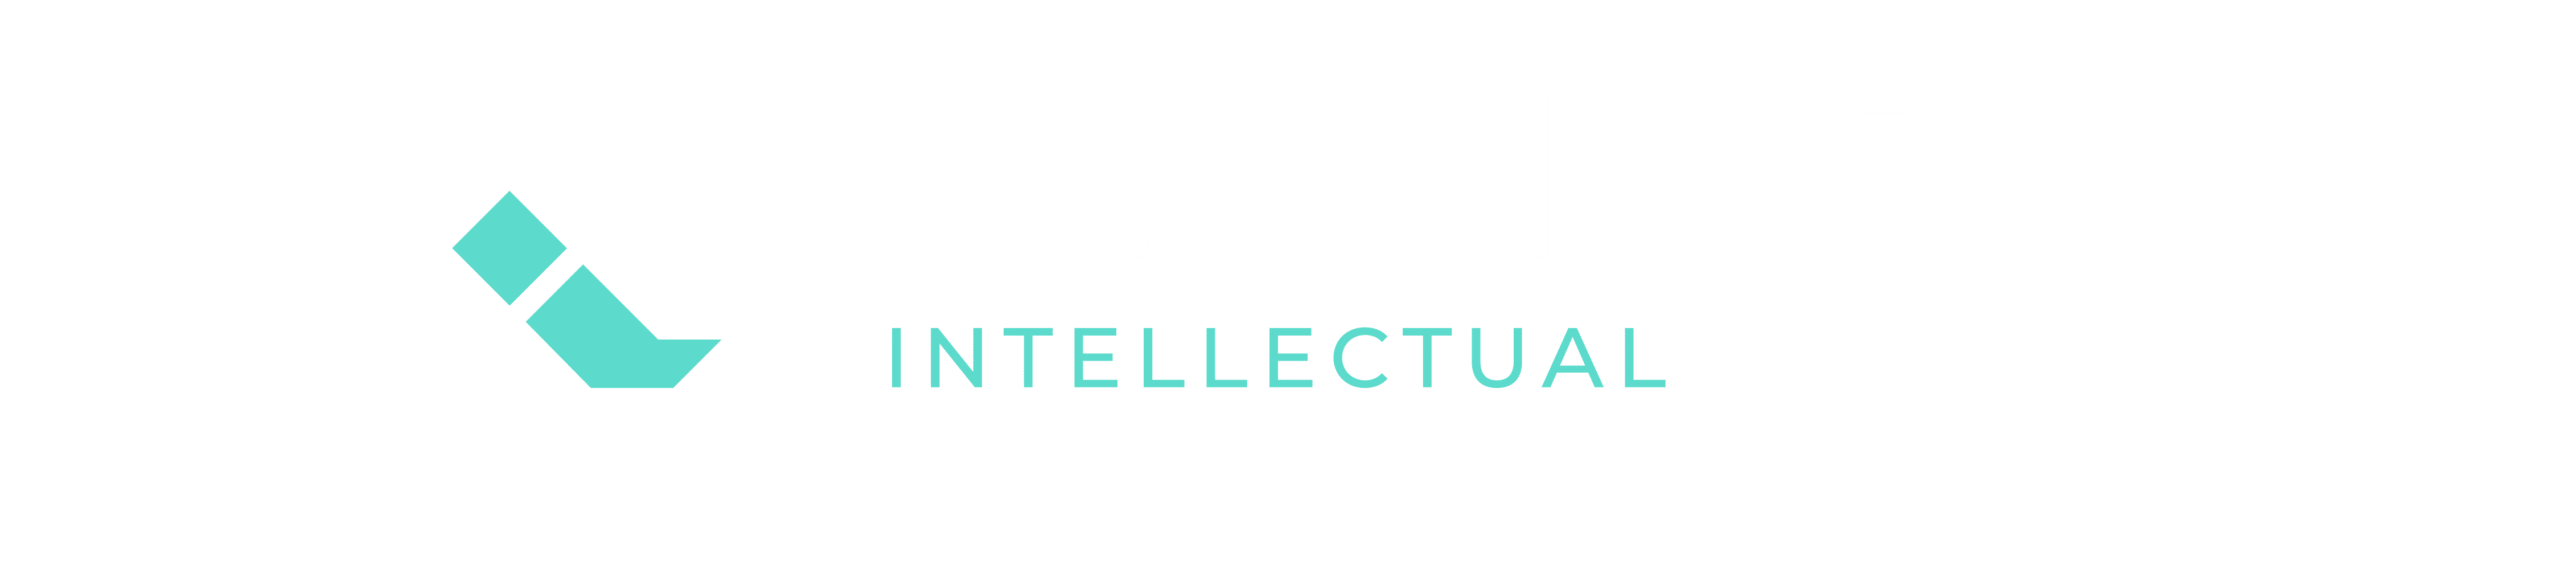 Alphabet Intellectual Property - The A to Z for your IP